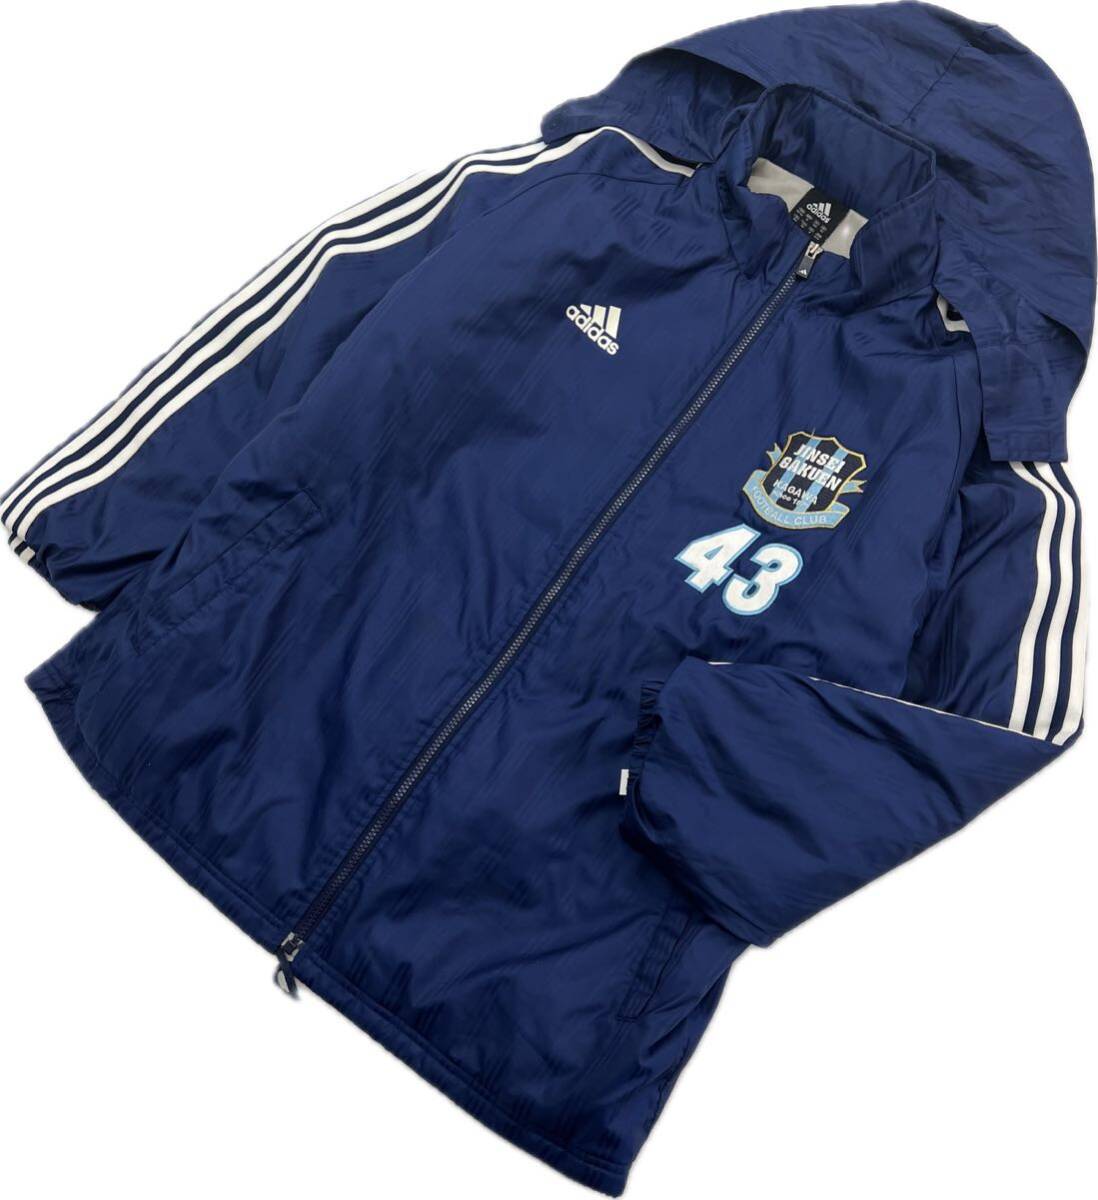 adidas *.. an educational institution Kagawa a little over . soccer part bench coat jacket coat navy O soccer sport training Adidas #EA277